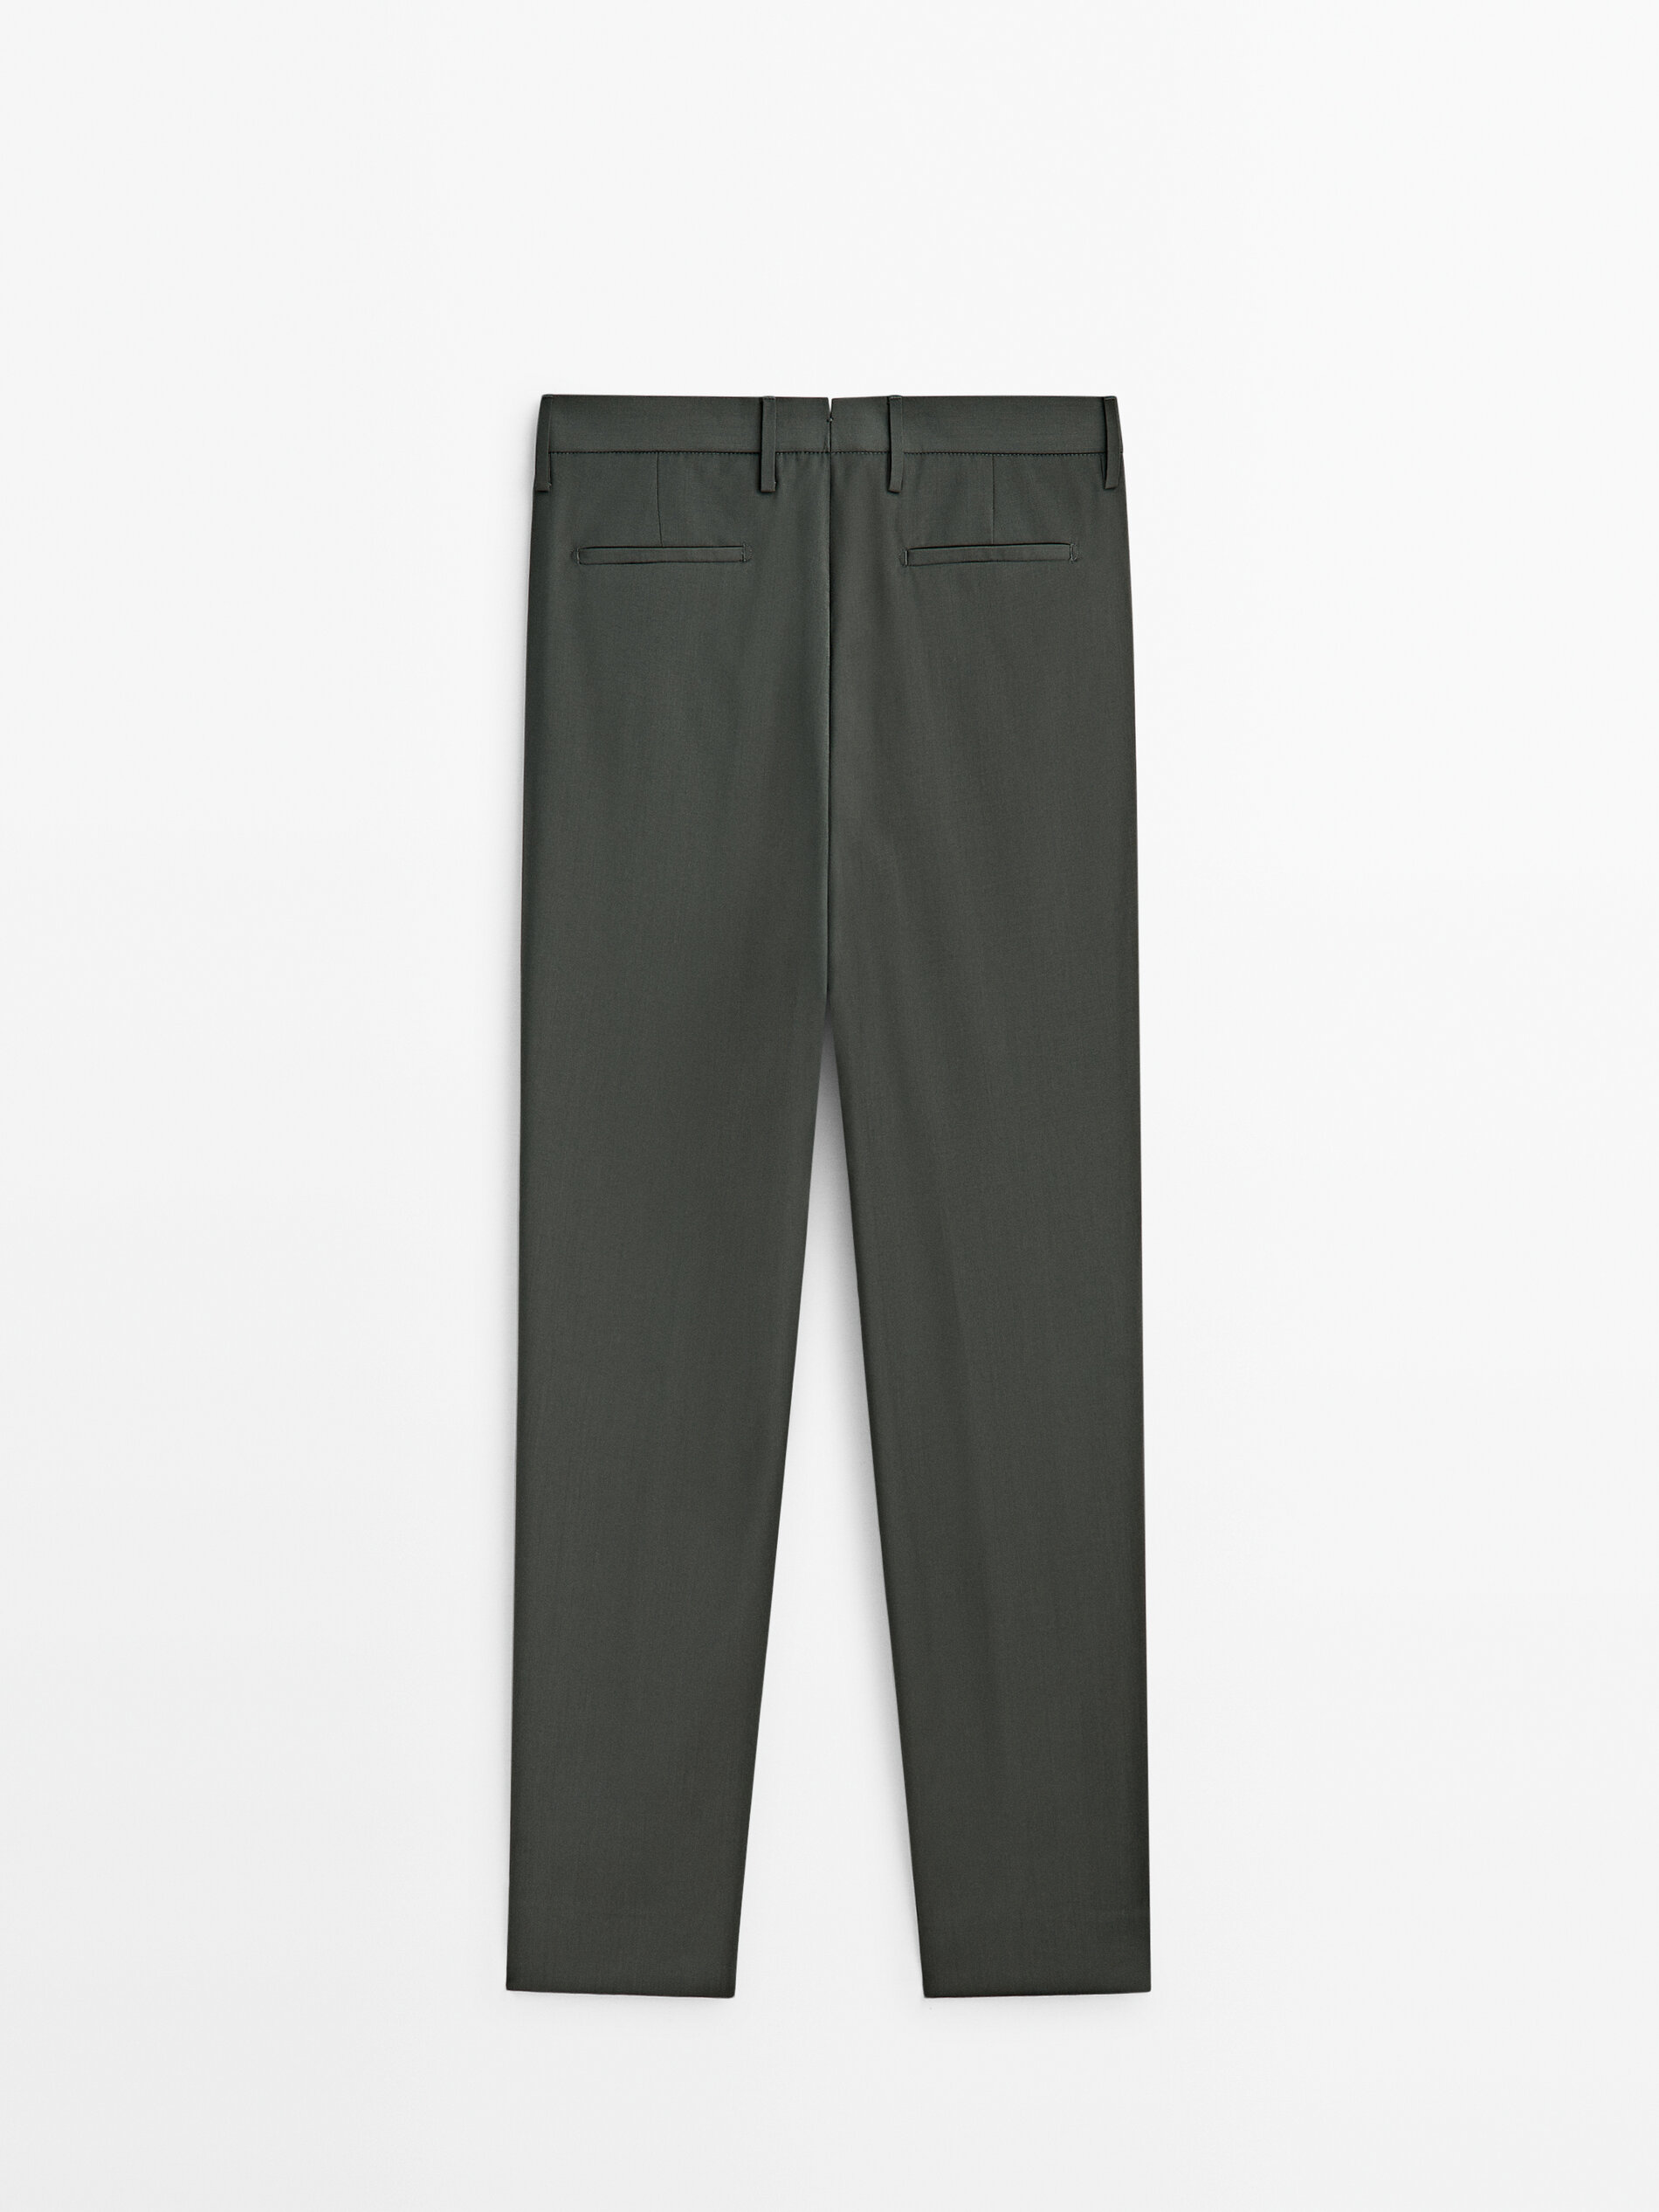 Massimo Dutti 100% wool check trousers | Vinted